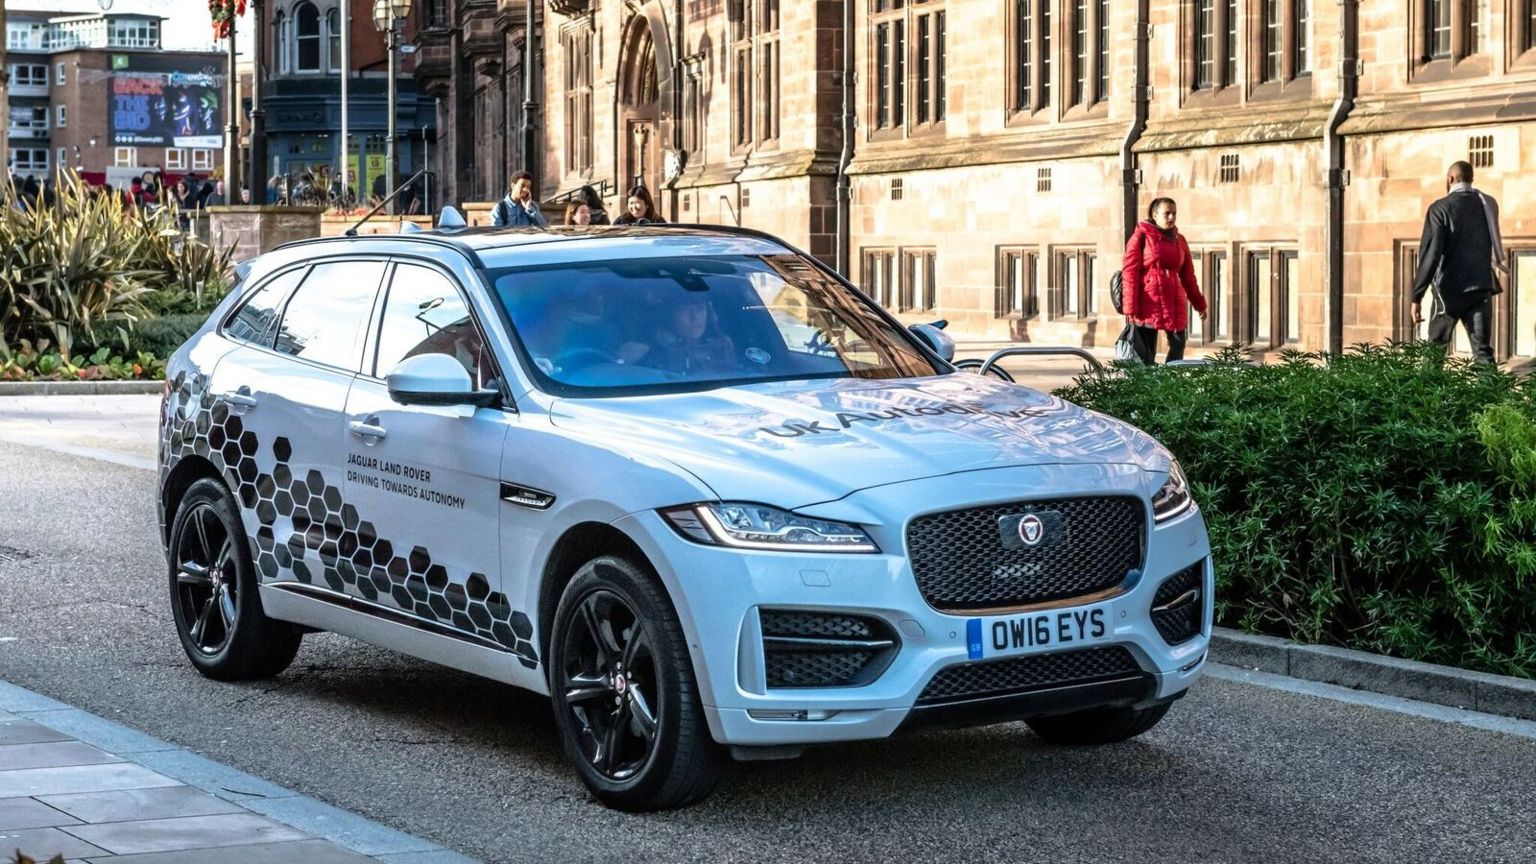 One of Jaguar Land Rover's driverless cars